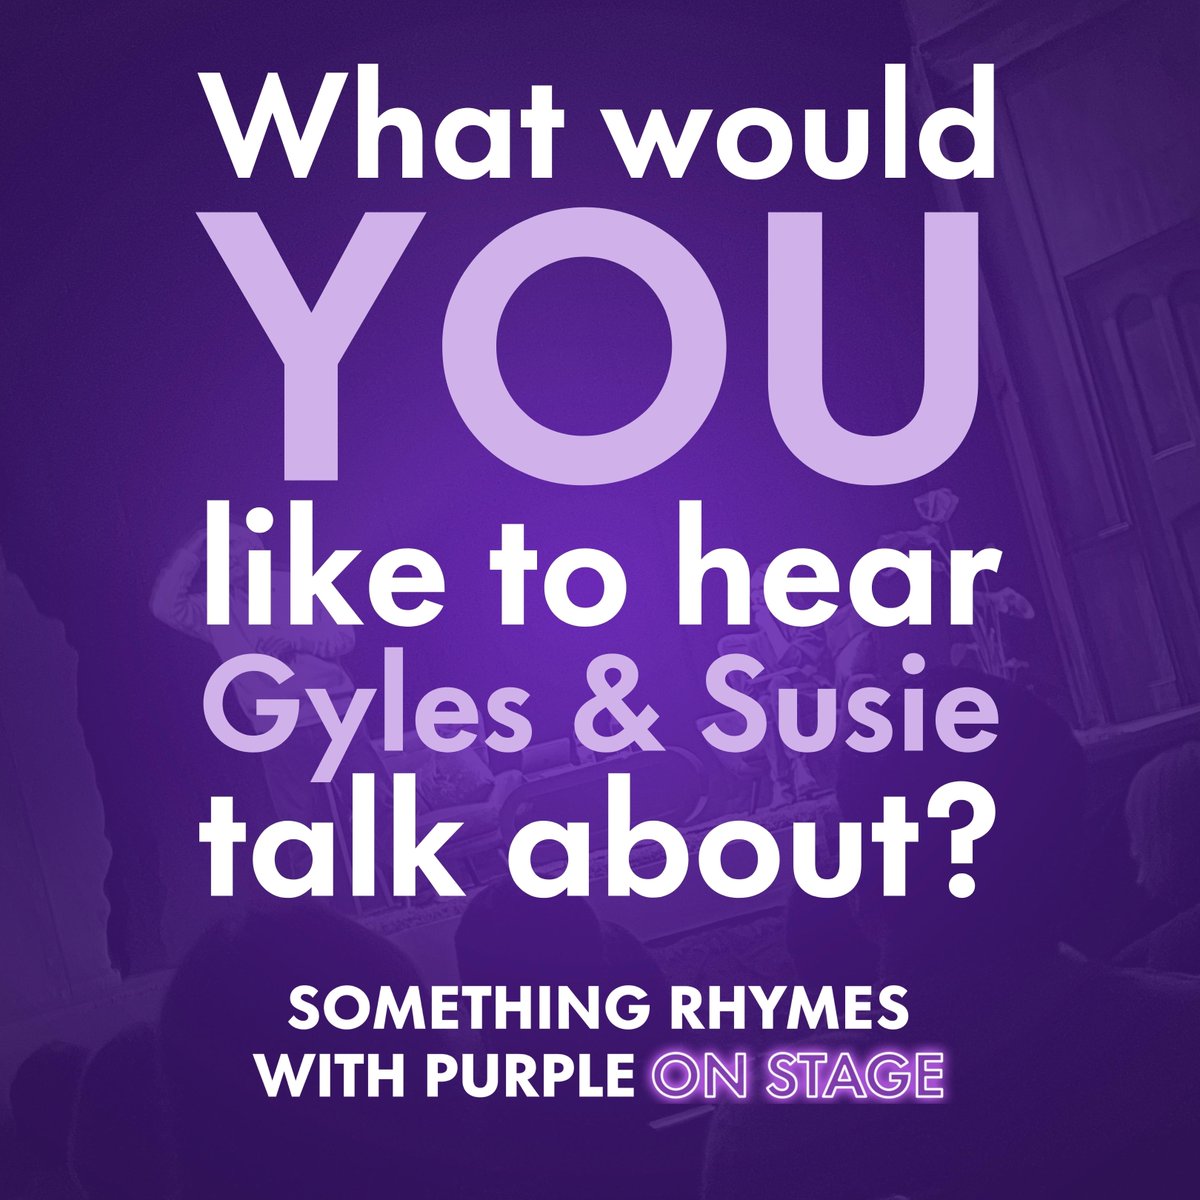 We've been having the best time at the Something Rhymes with Purple live shows! It got us thinking... what would YOU like to see Gyles and Susie talk about at an upcoming show? 🤔 Comment you suggestions for future show themes below! 💜 SomethingRhymeswithPurple.com